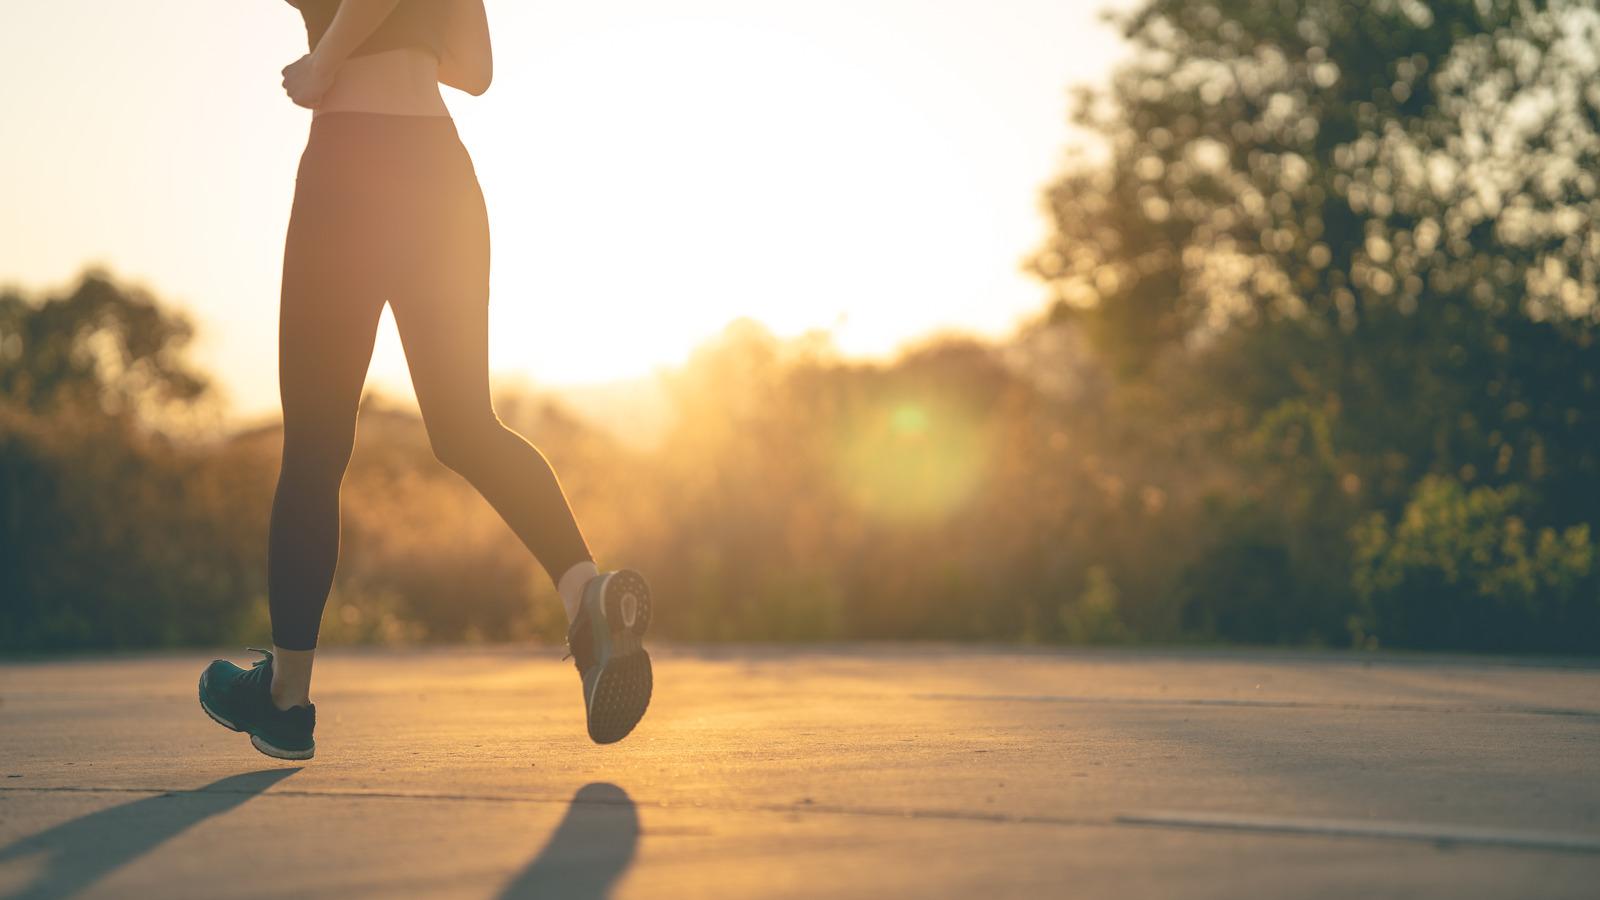 How Dangerous Is It To Run During The Summer?